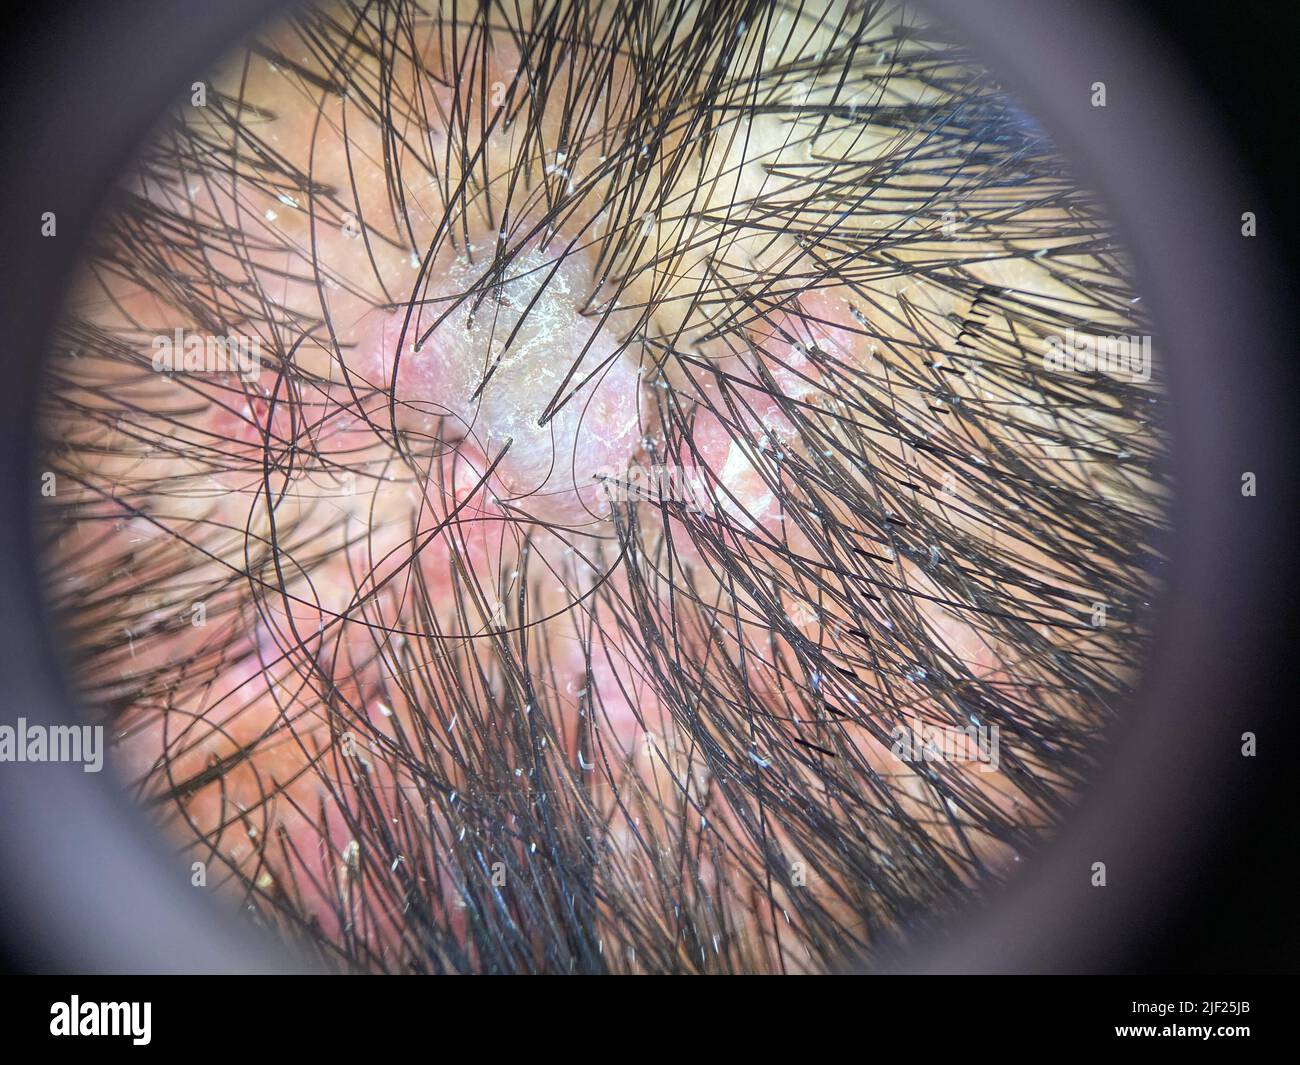 576 Infection Inflammation Hair Follicles Images Stock Photos  Vectors   Shutterstock